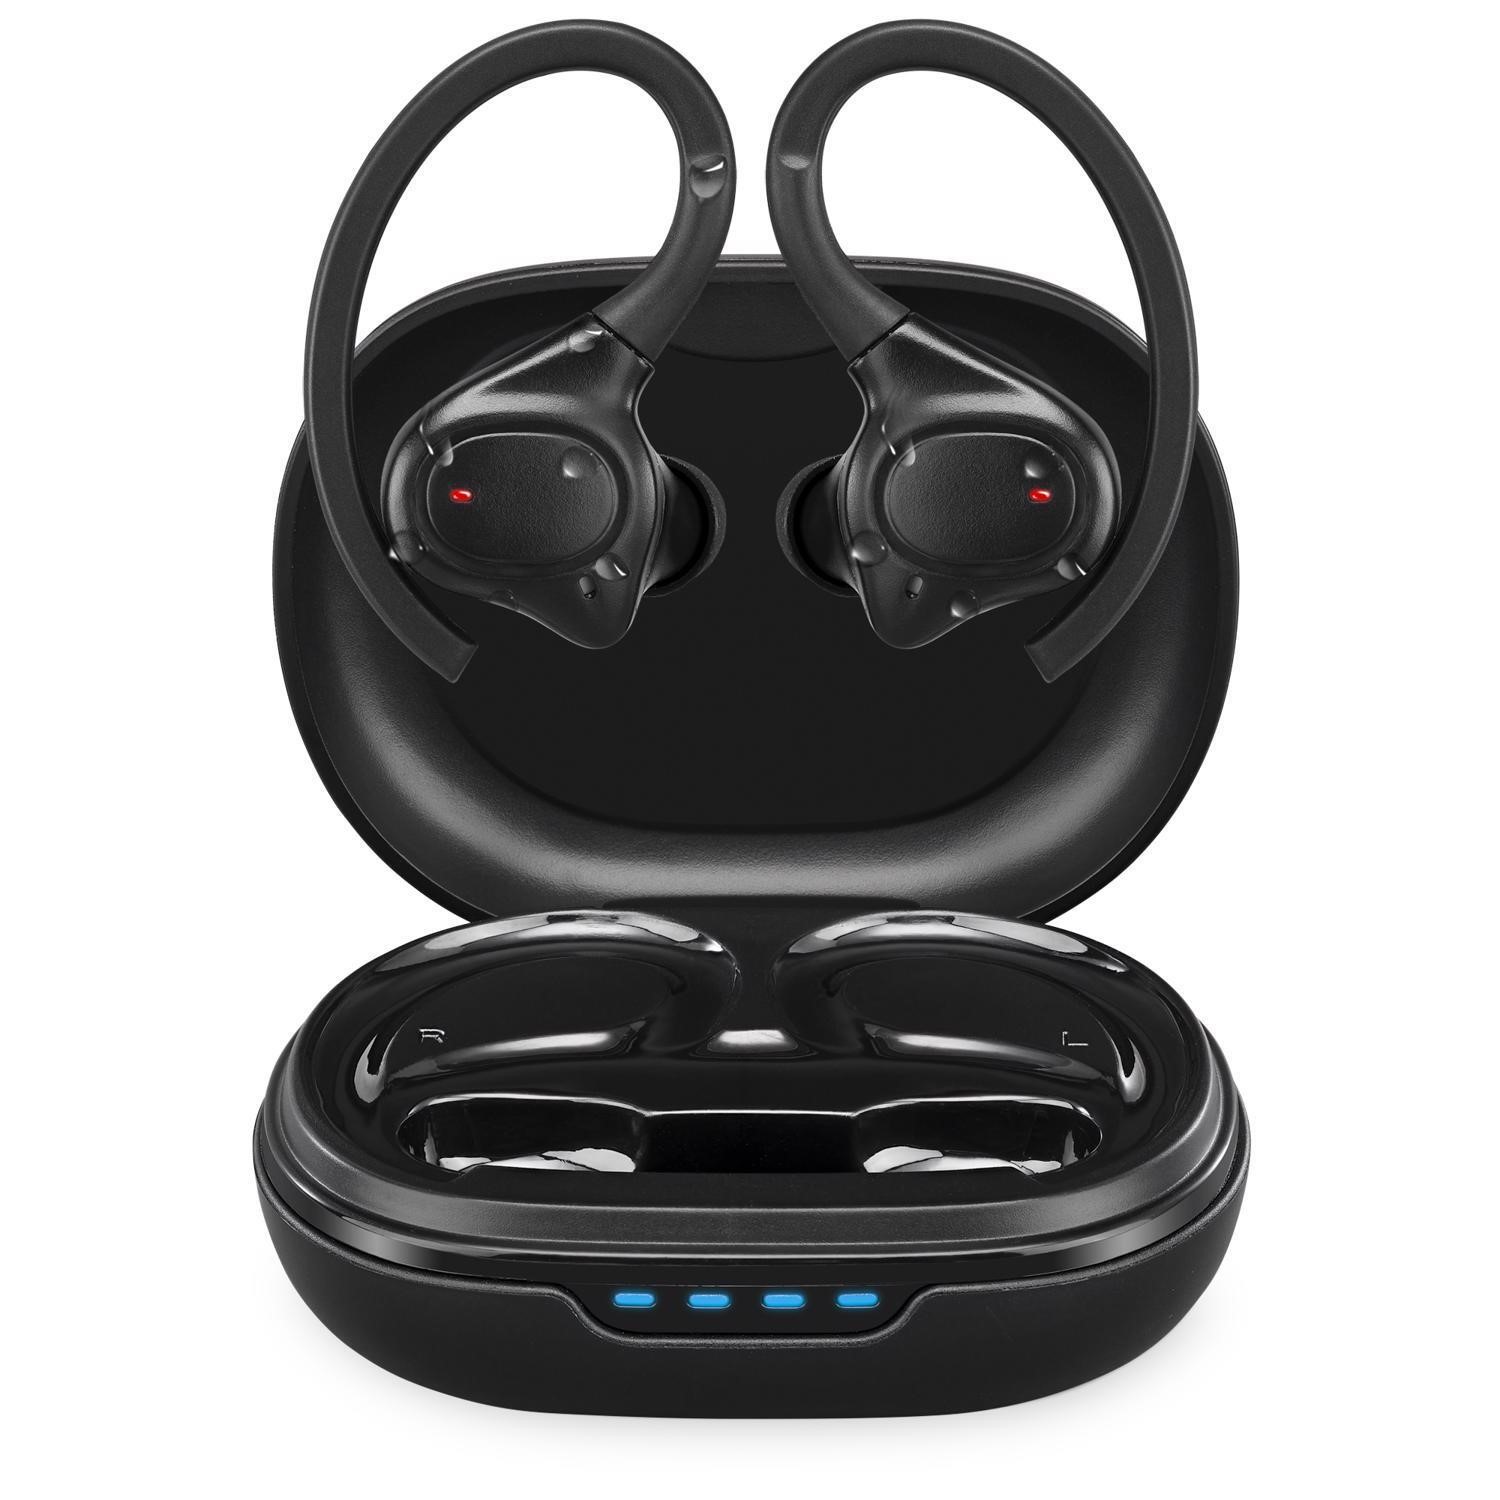 ILive Water-Resistant Wireless Earbuds Black $50